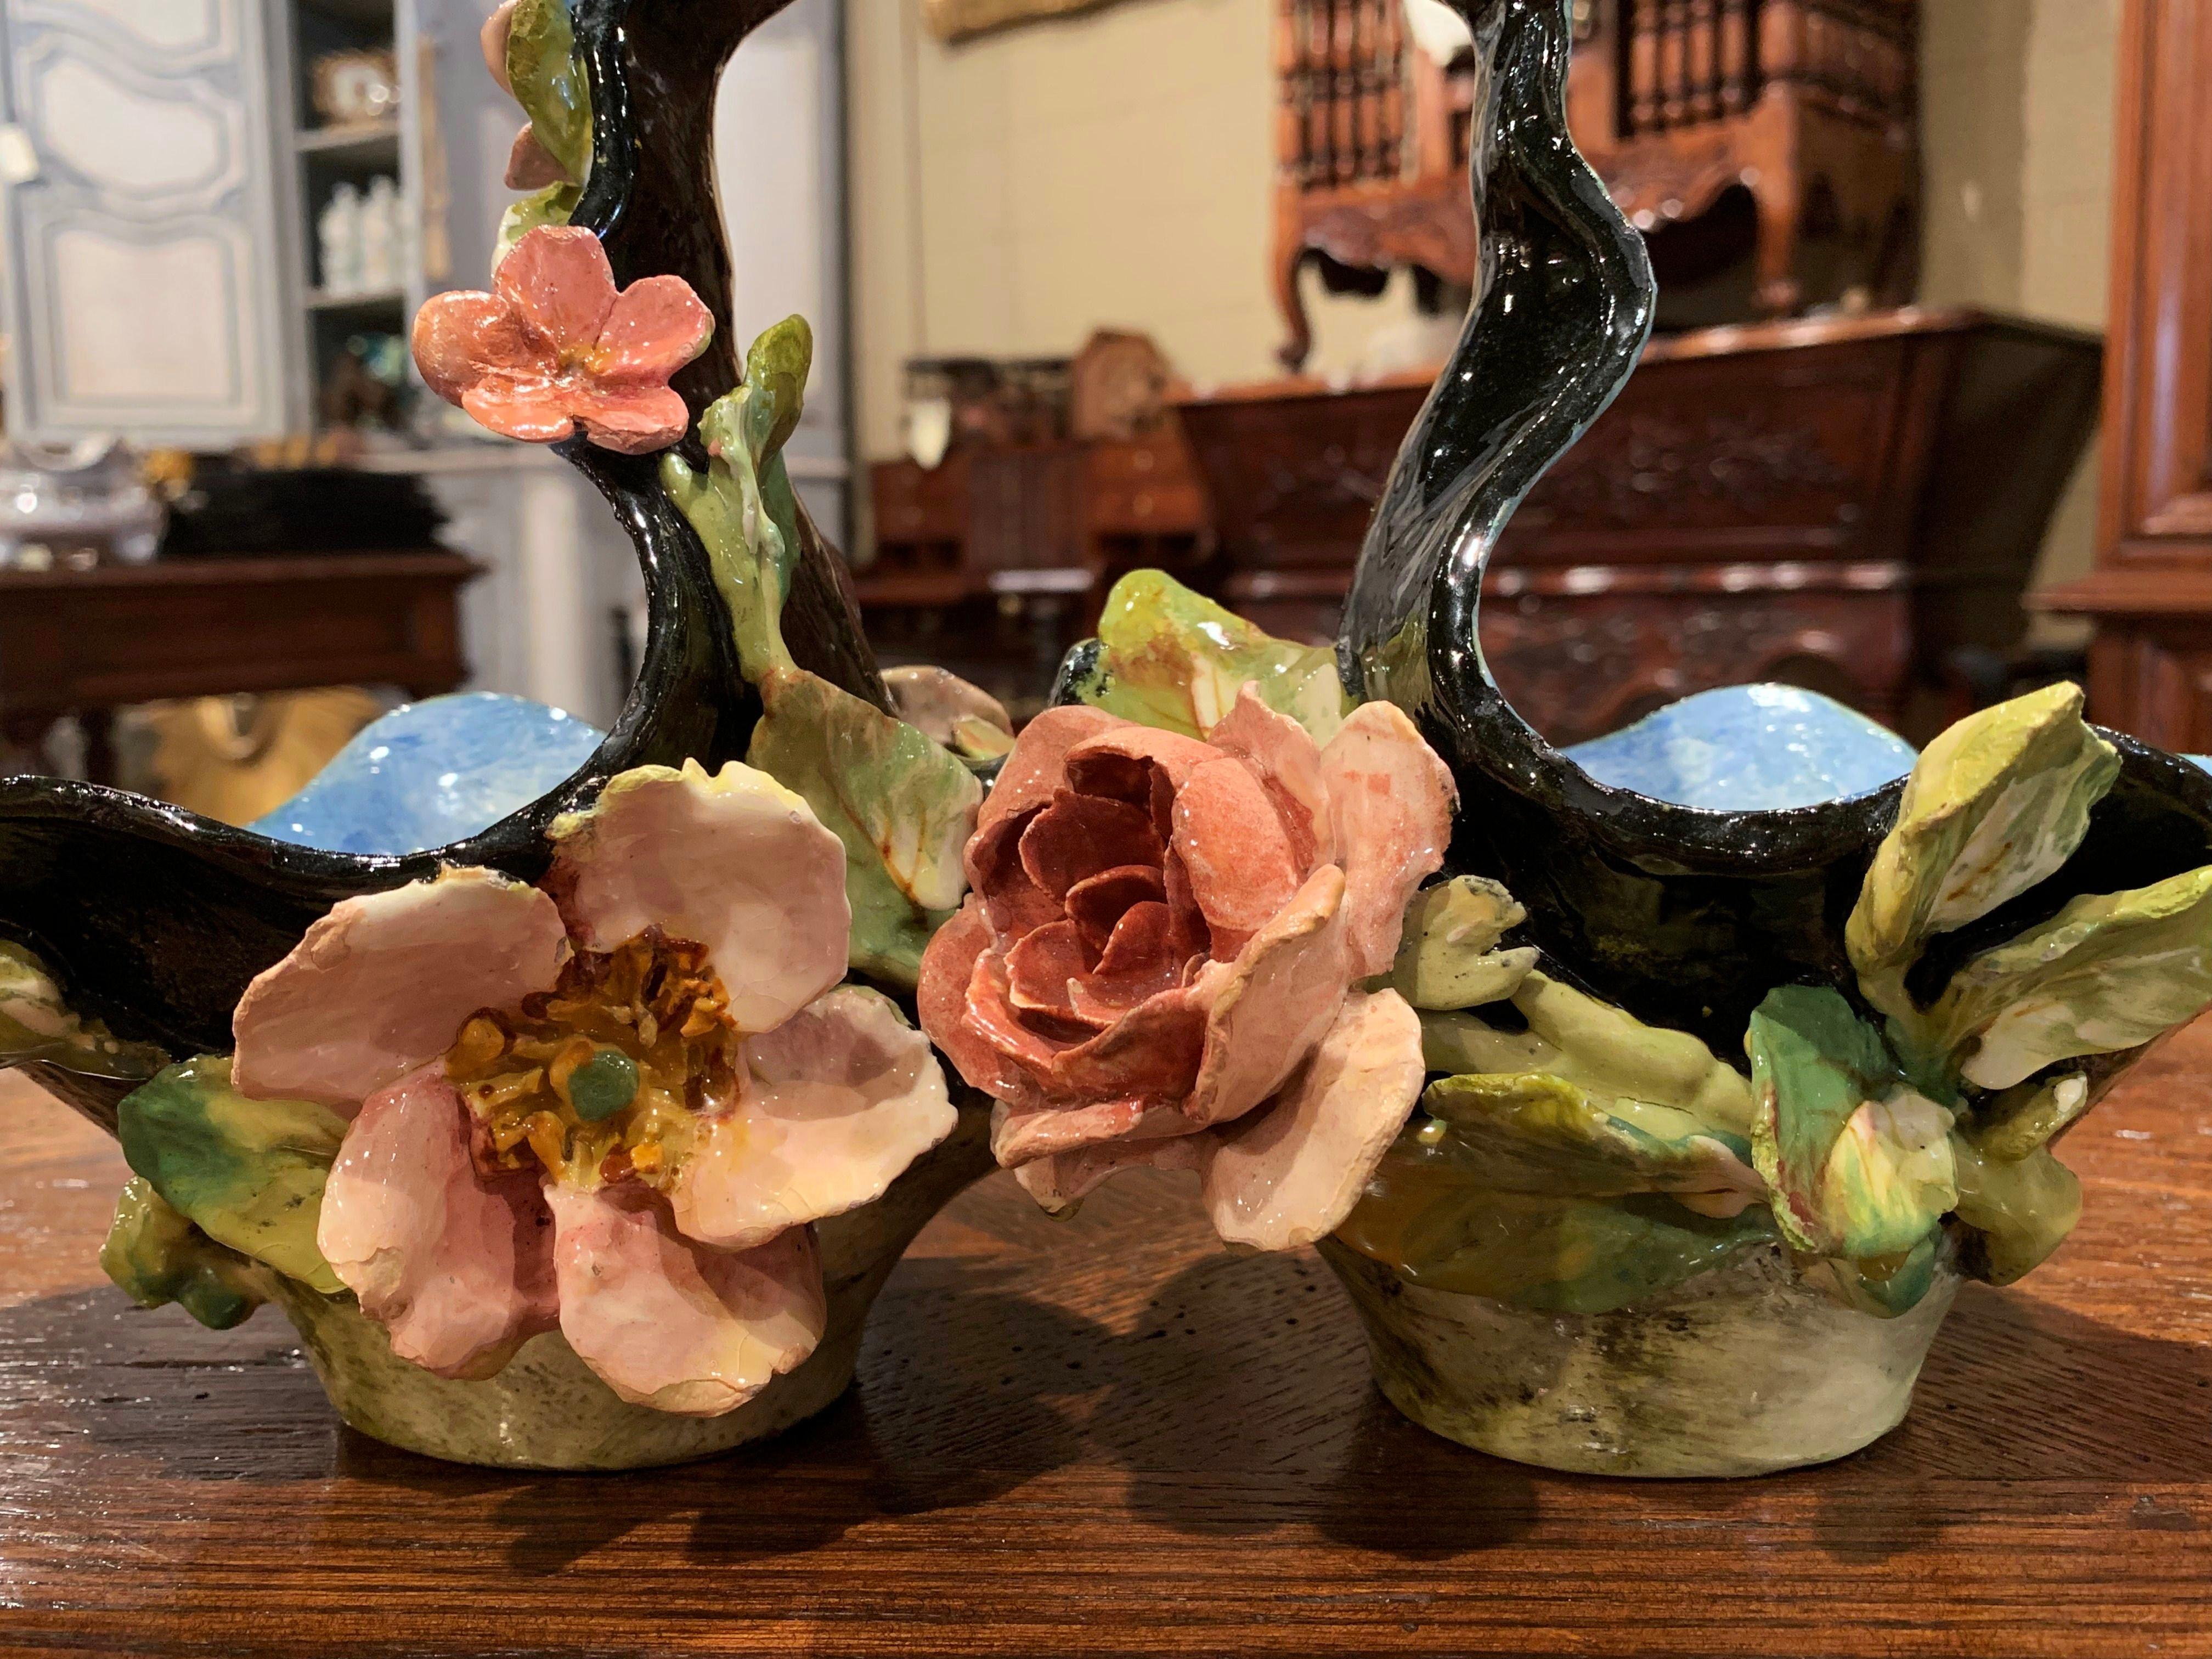 Place this sculptural, antique jardinière on a shelf or on a kitchen counter for a pop of color. Crafted in Montigny-sur-Loing, France circa 1860, the colorful basket has a central handle and features a double vase decorated with floral and leaf